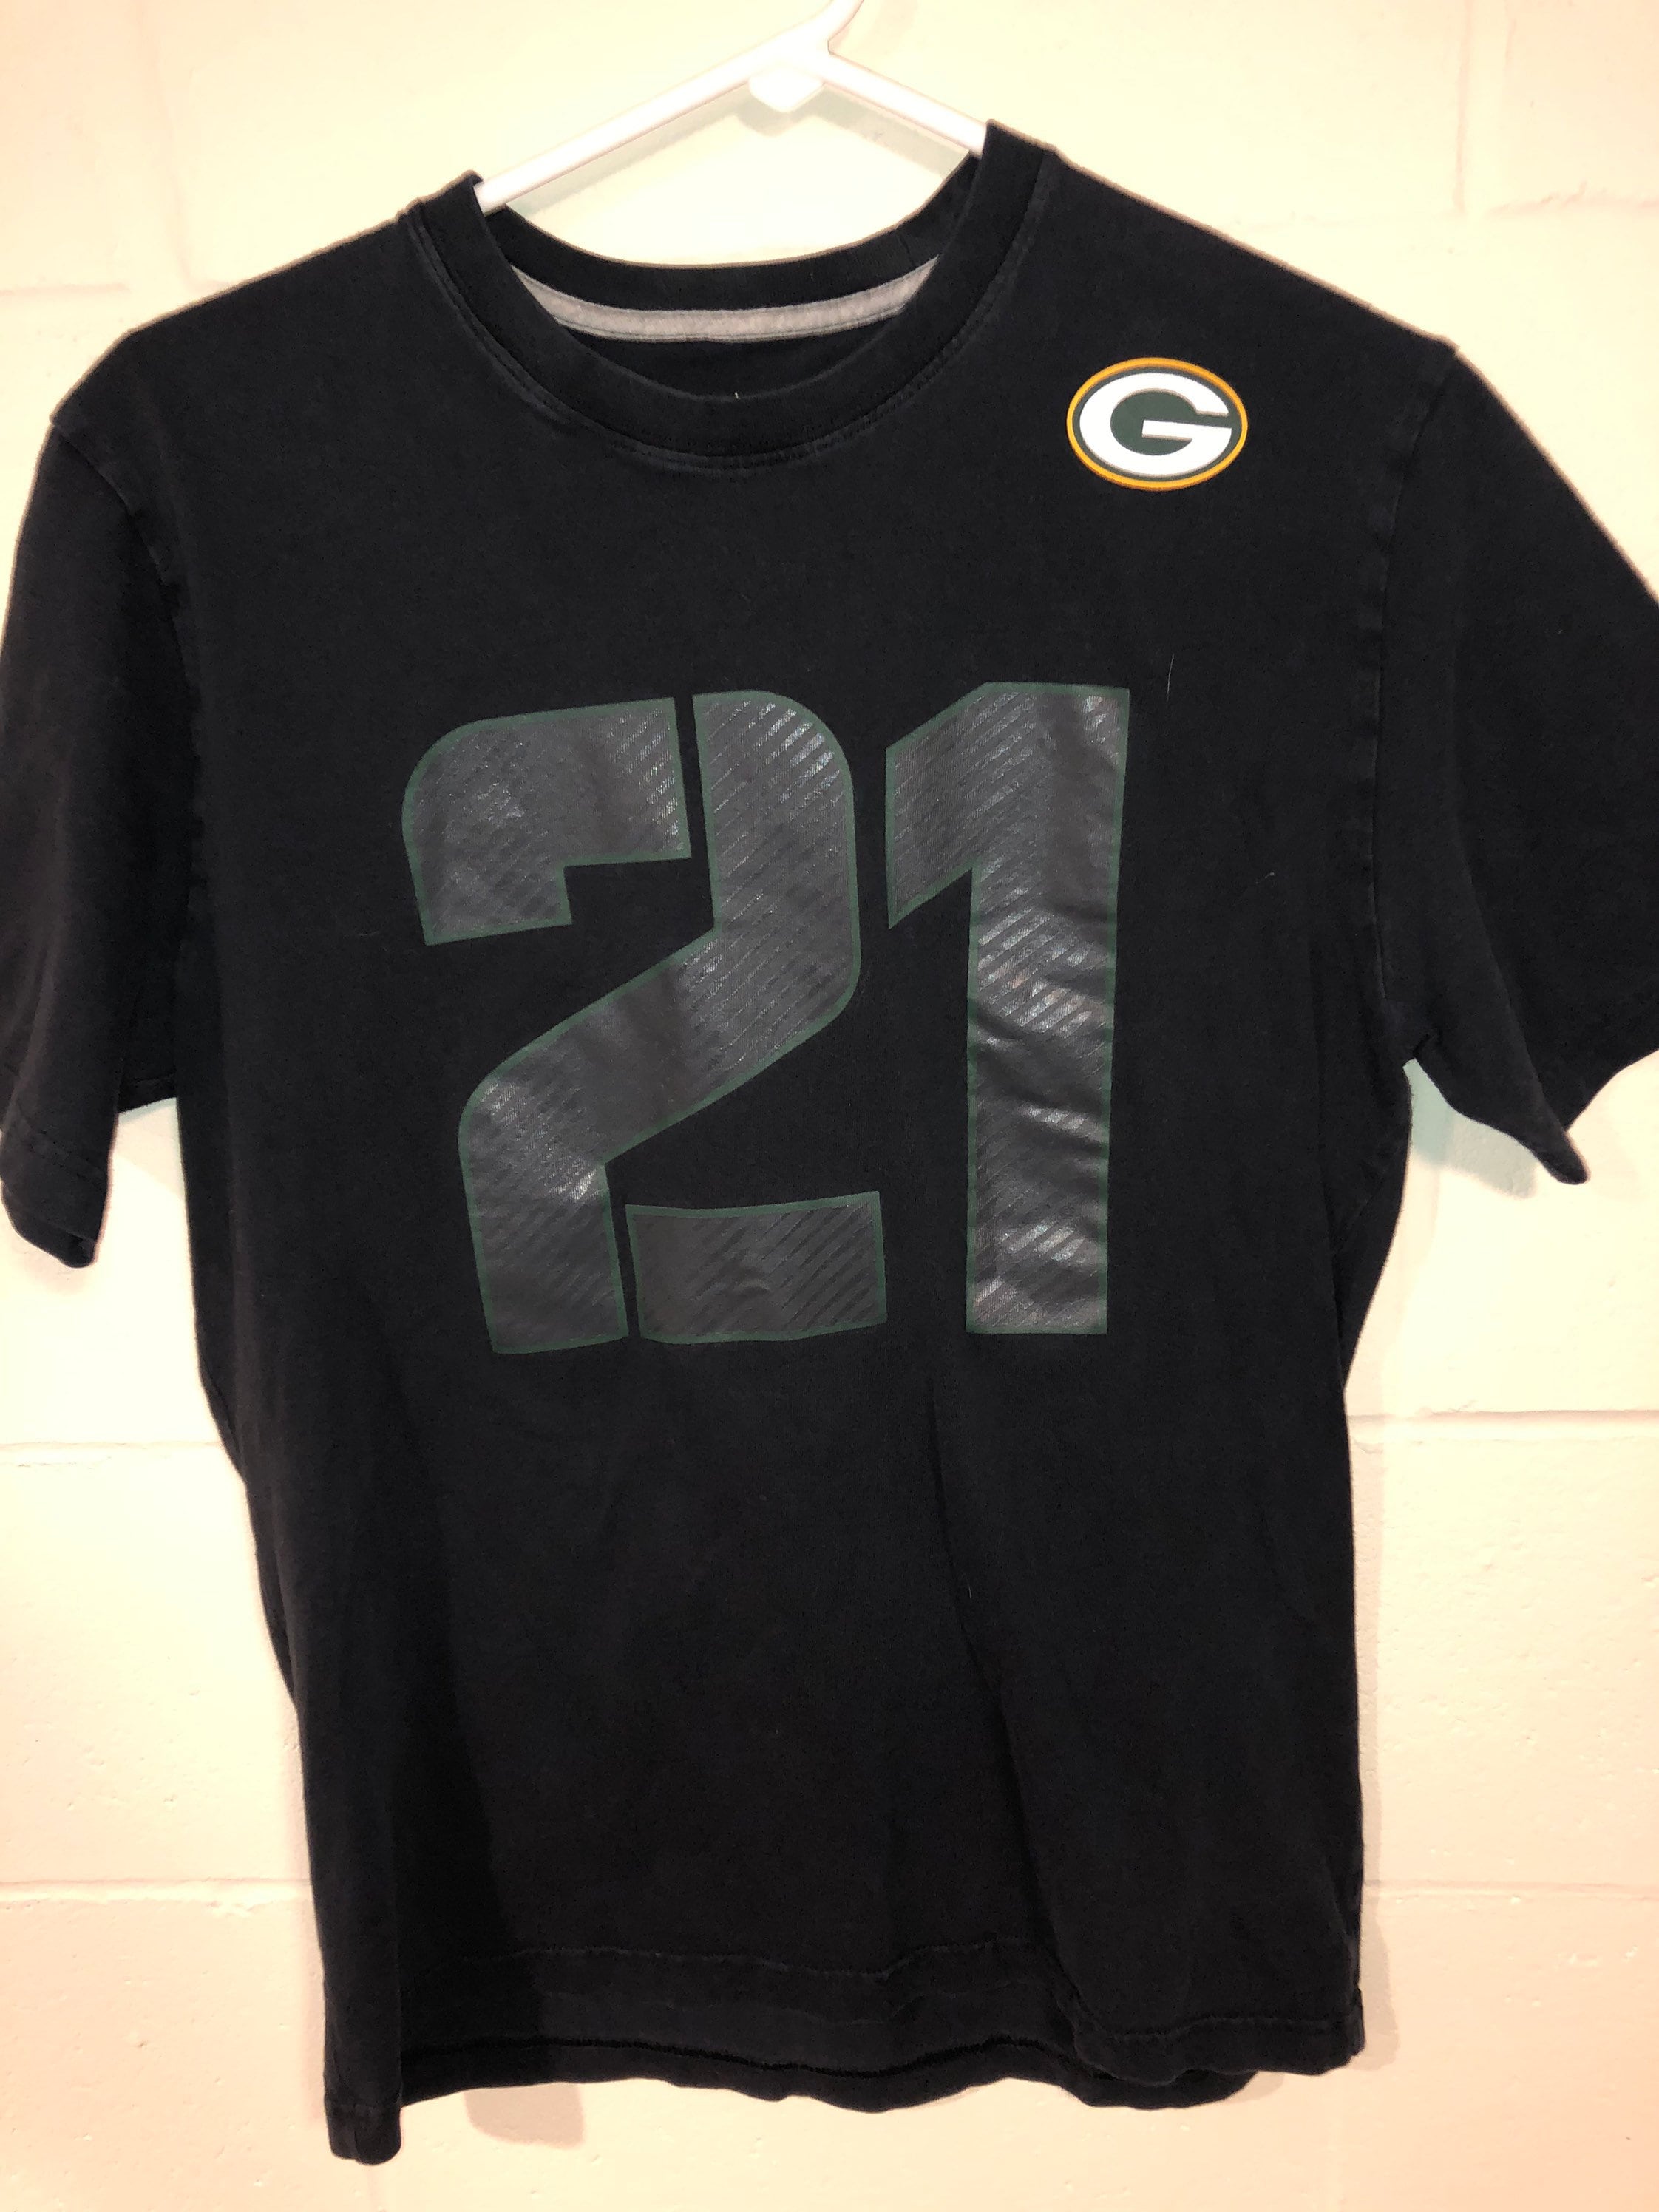 woodson packers jersey